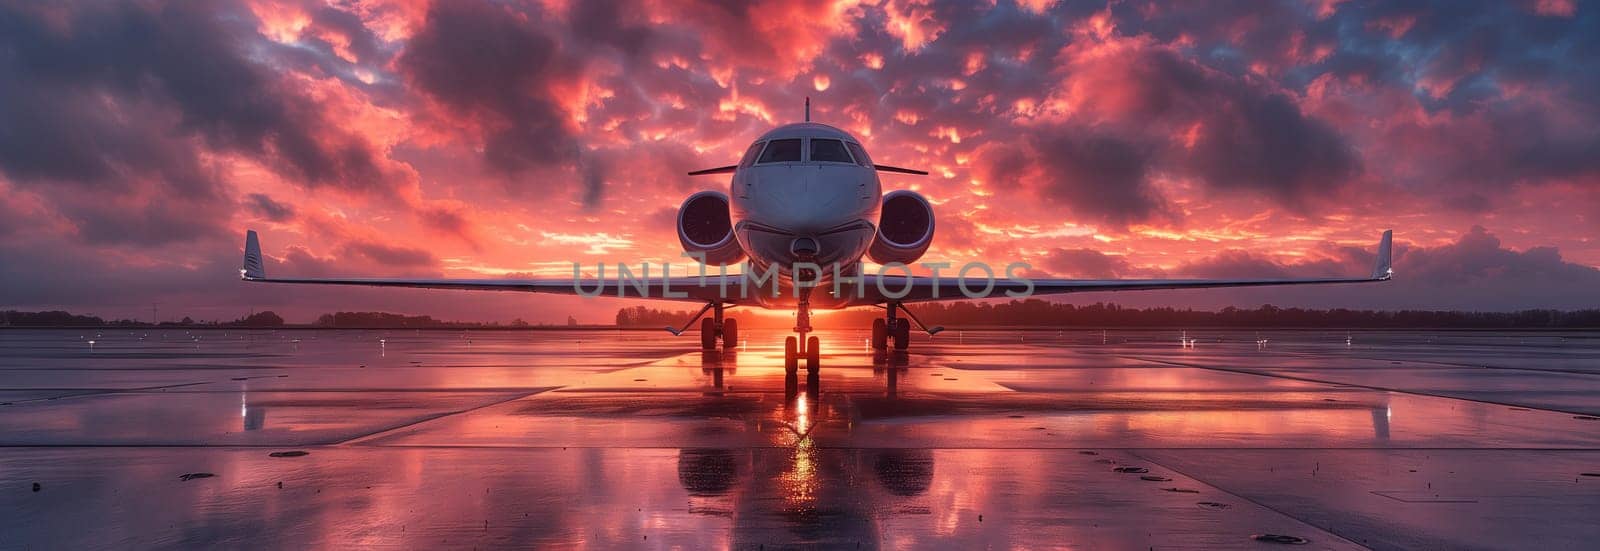 A private jet is parked on a runway, surrounded by a stunning sunset reflecting in the water. The magenta clouds and plant life add to the artistic event happening in the sky